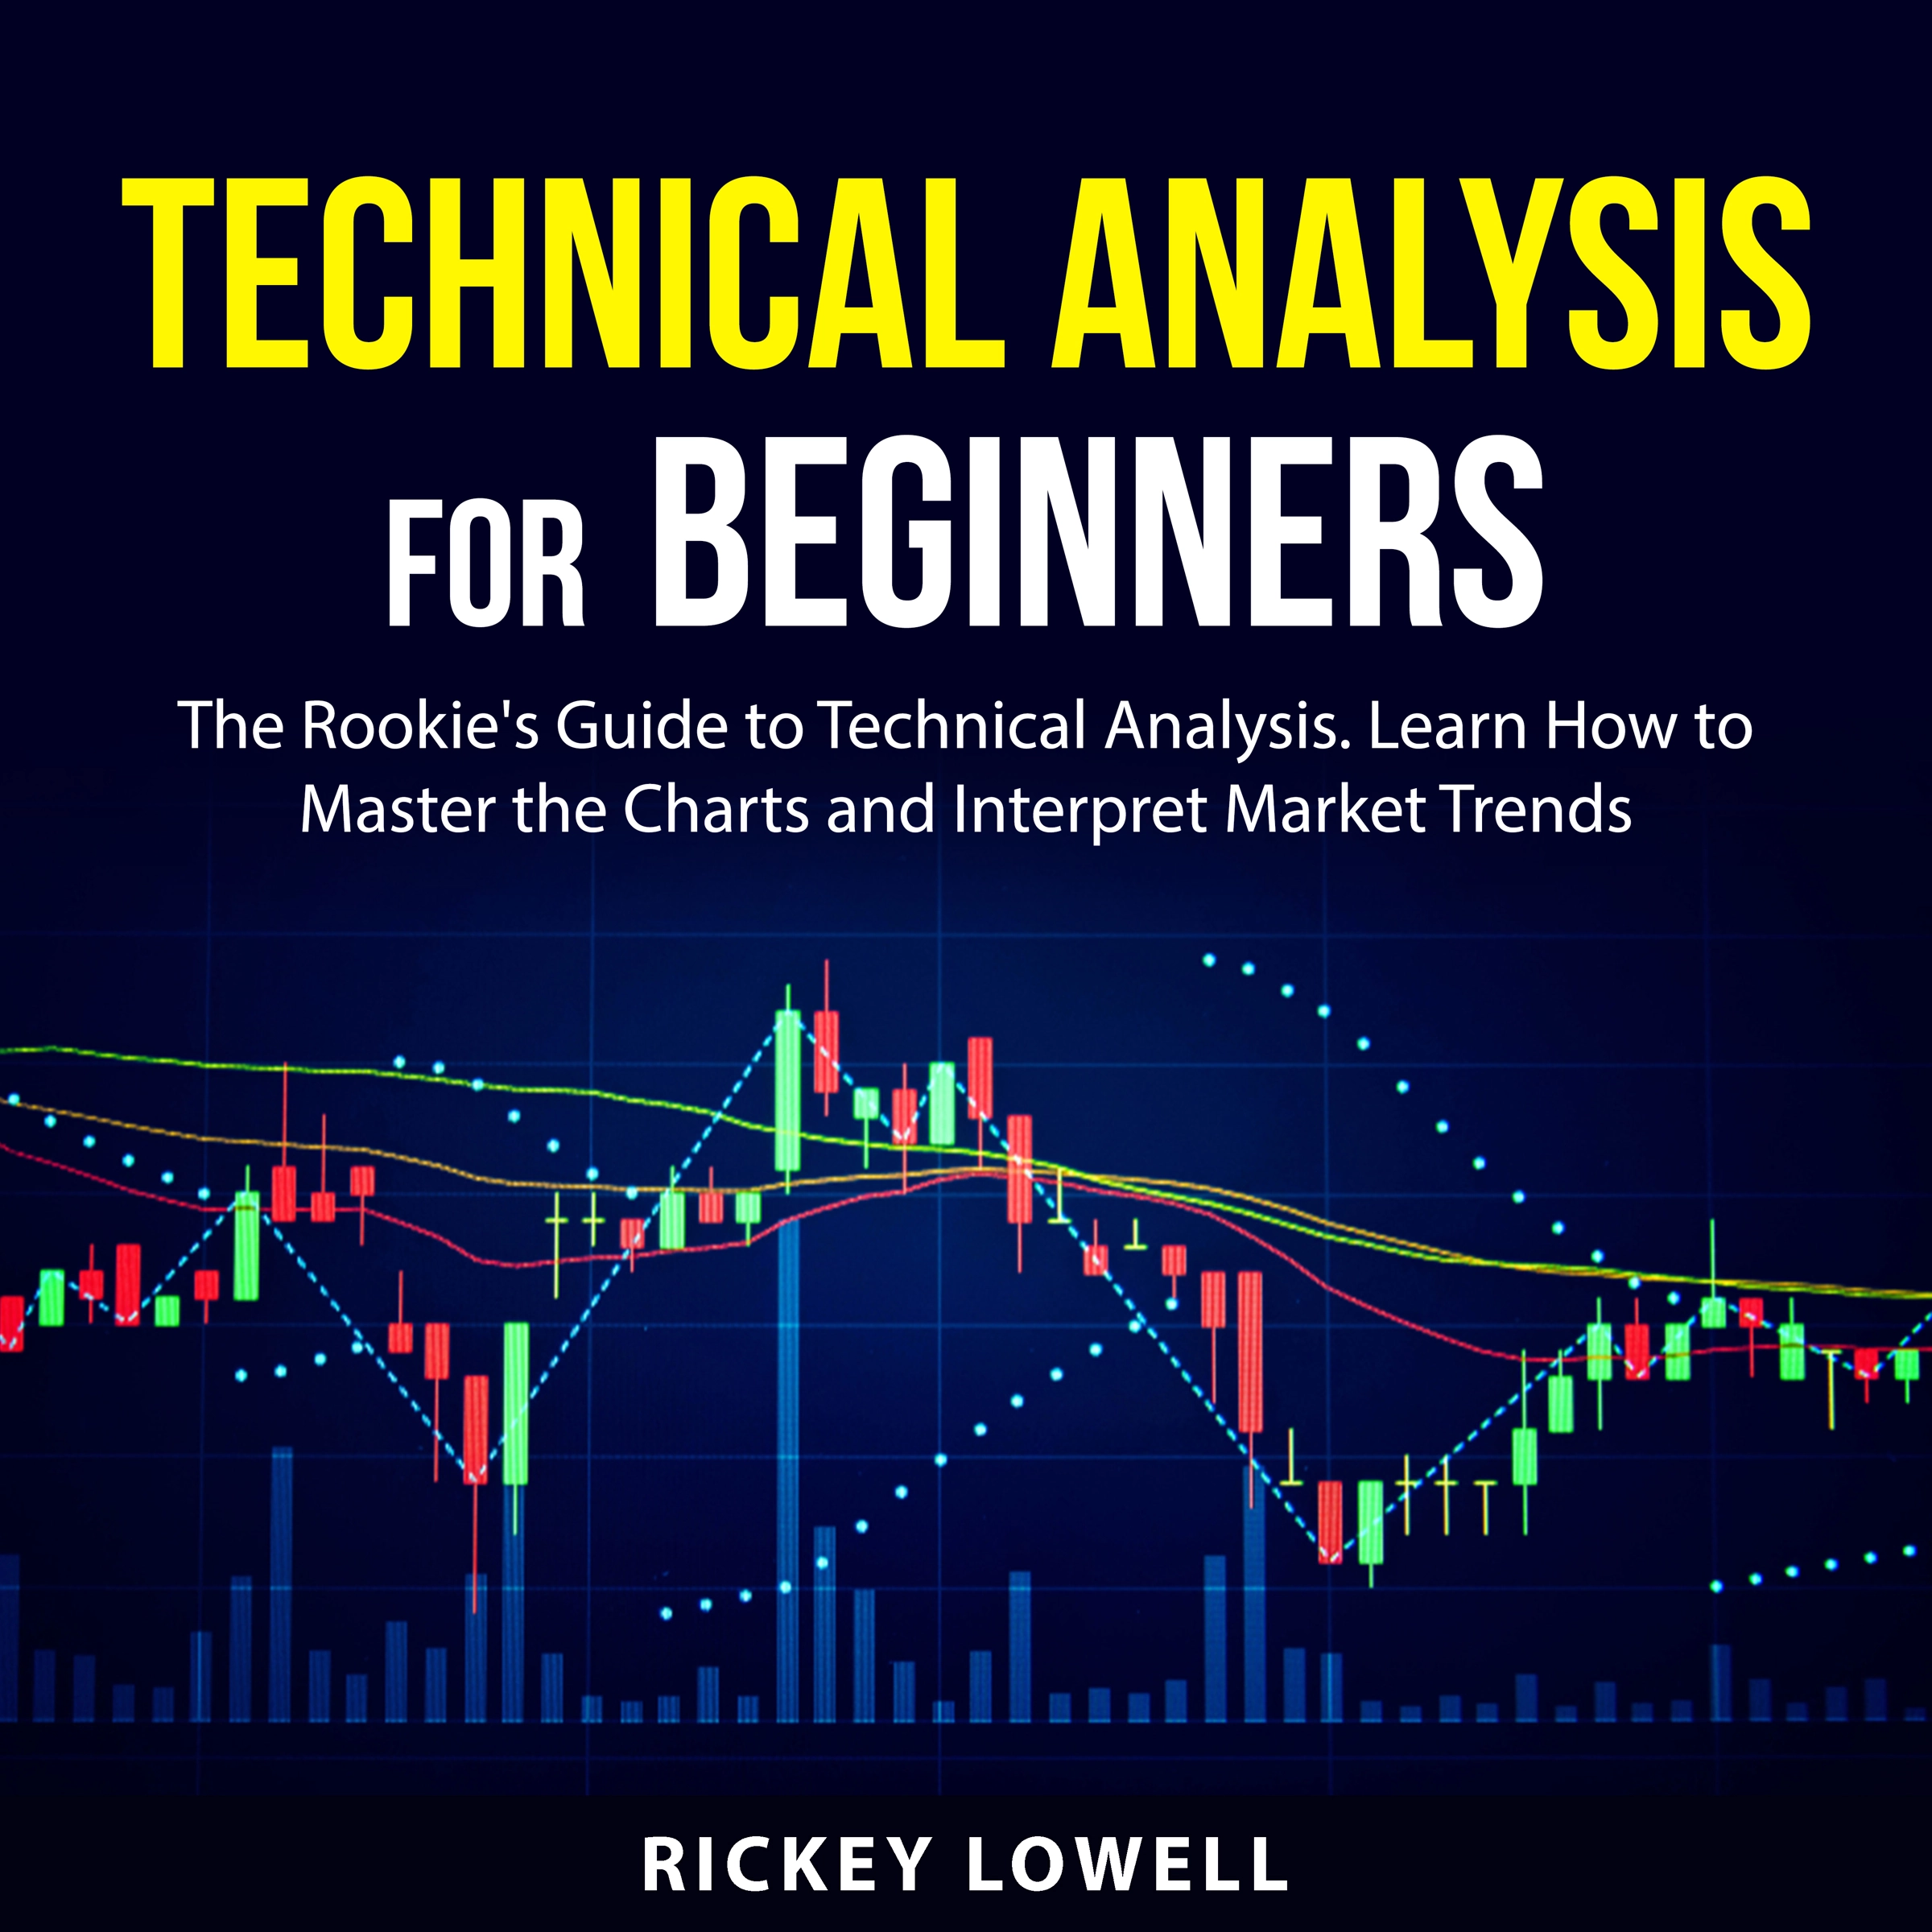 Technical Analysis for Beginners Audiobook by Rickey Lowell